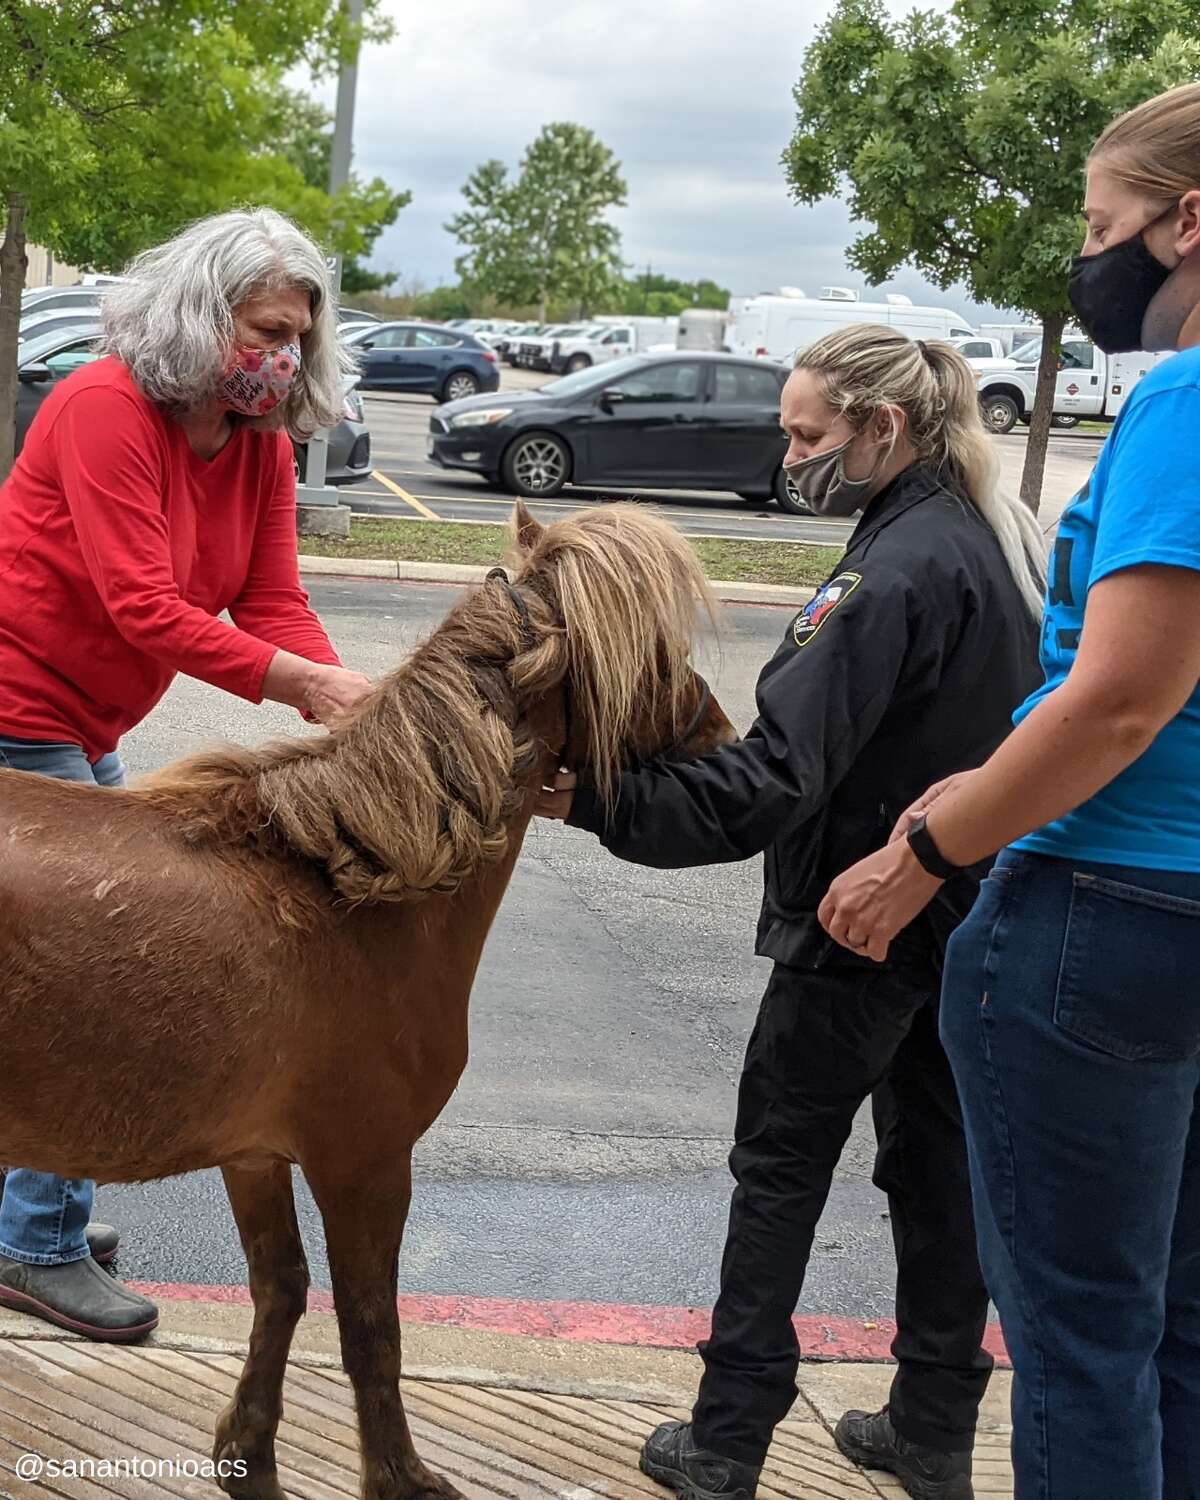 On Monday, ACS posted on its Facebook page that its offers recused a pony named Churro after a pack of dogs injured him. 